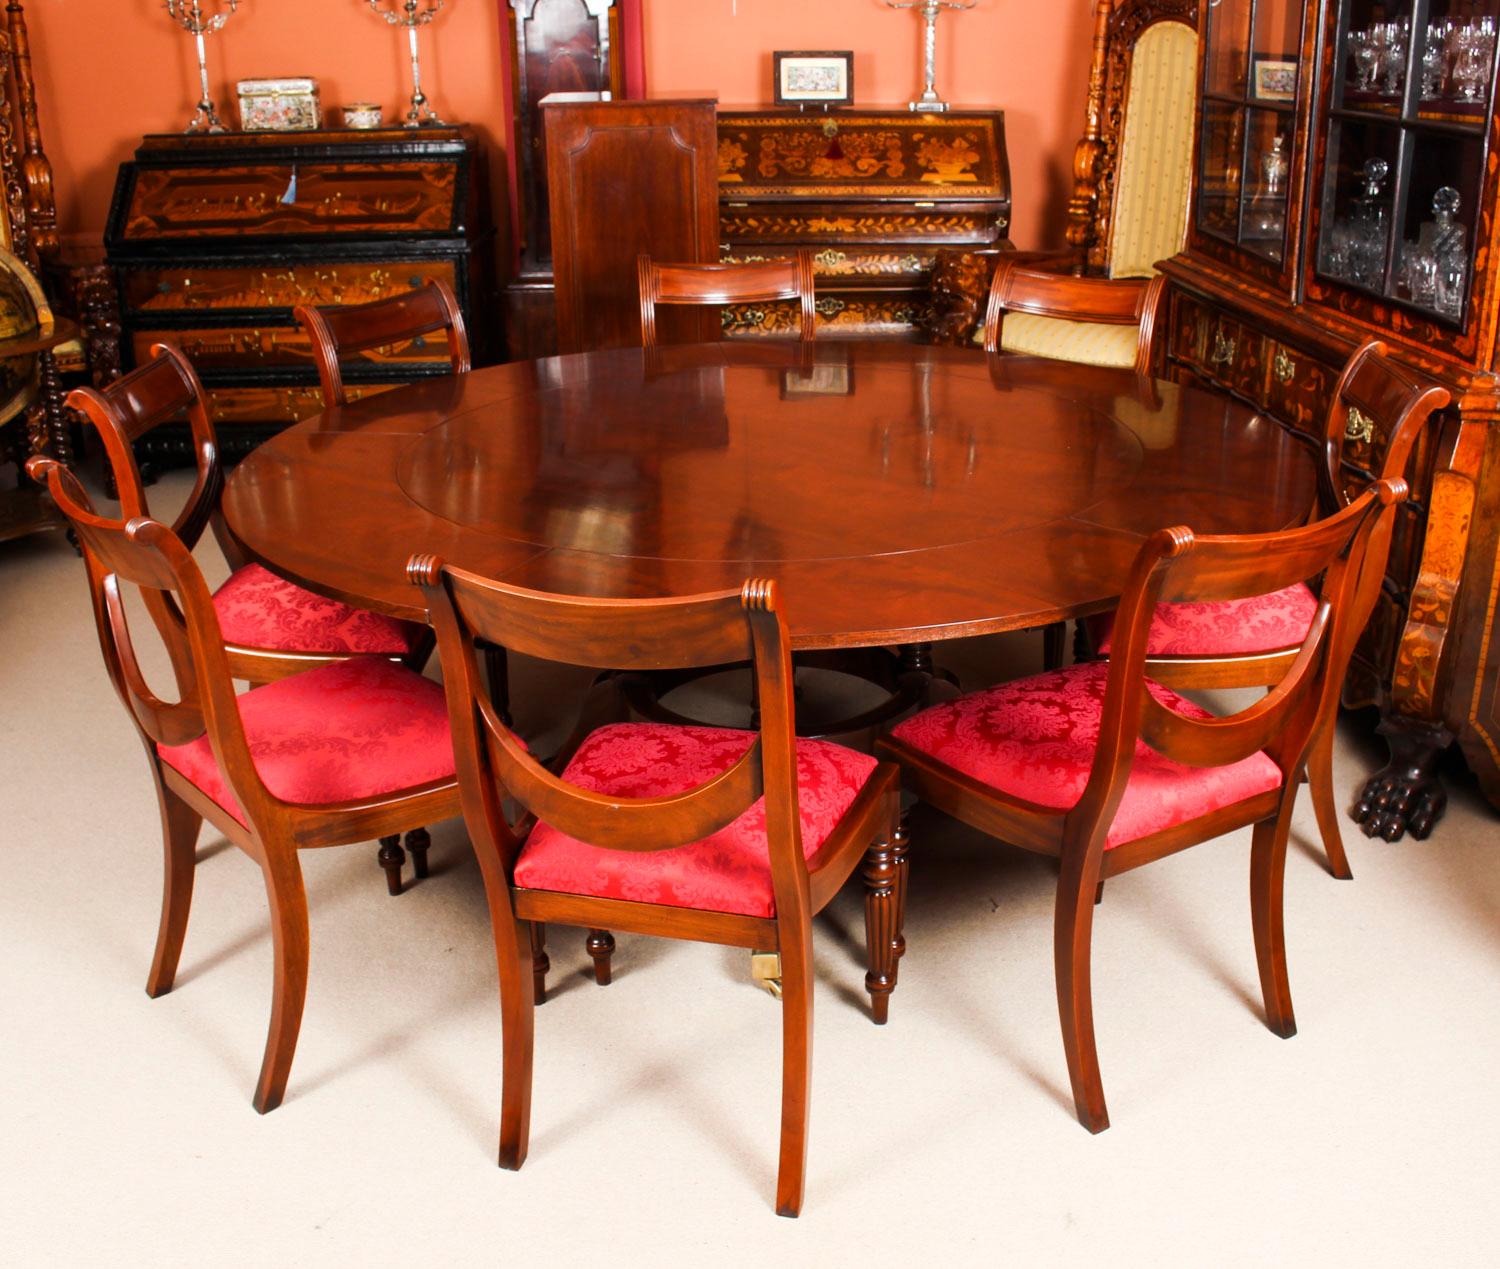 This is a beautiful Regency Revival Jupe style flame mahogany circular extending dining table, dating from the mid 20th Century.

The table has a solid mahogany top with five peripheral leaves that can be added around the circumference. It is raised